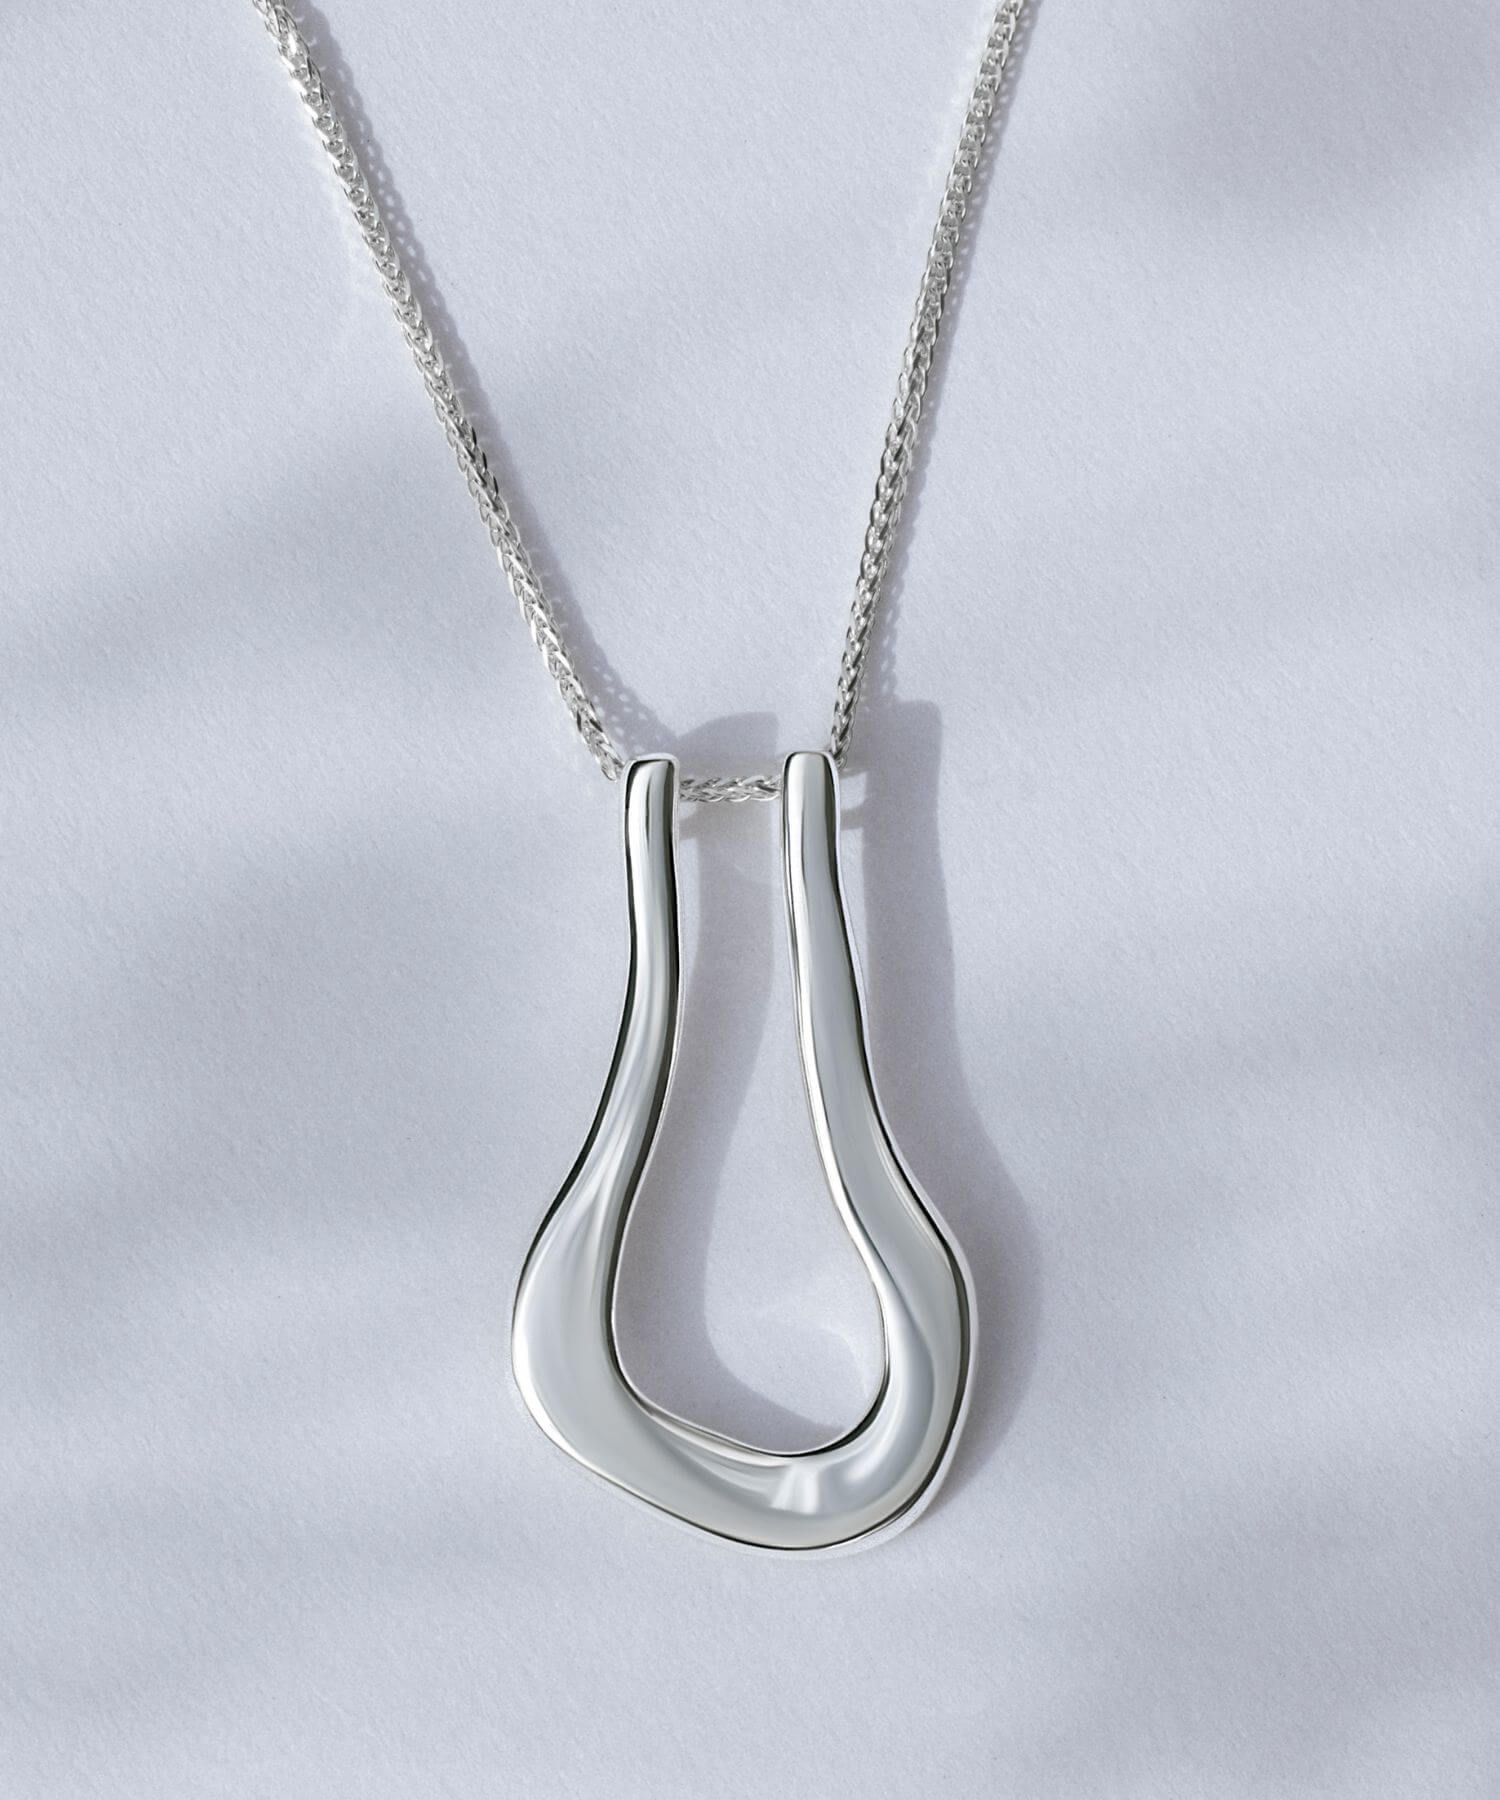 Linda Circle Pendant Necklace in Sterling Silver - MYKA